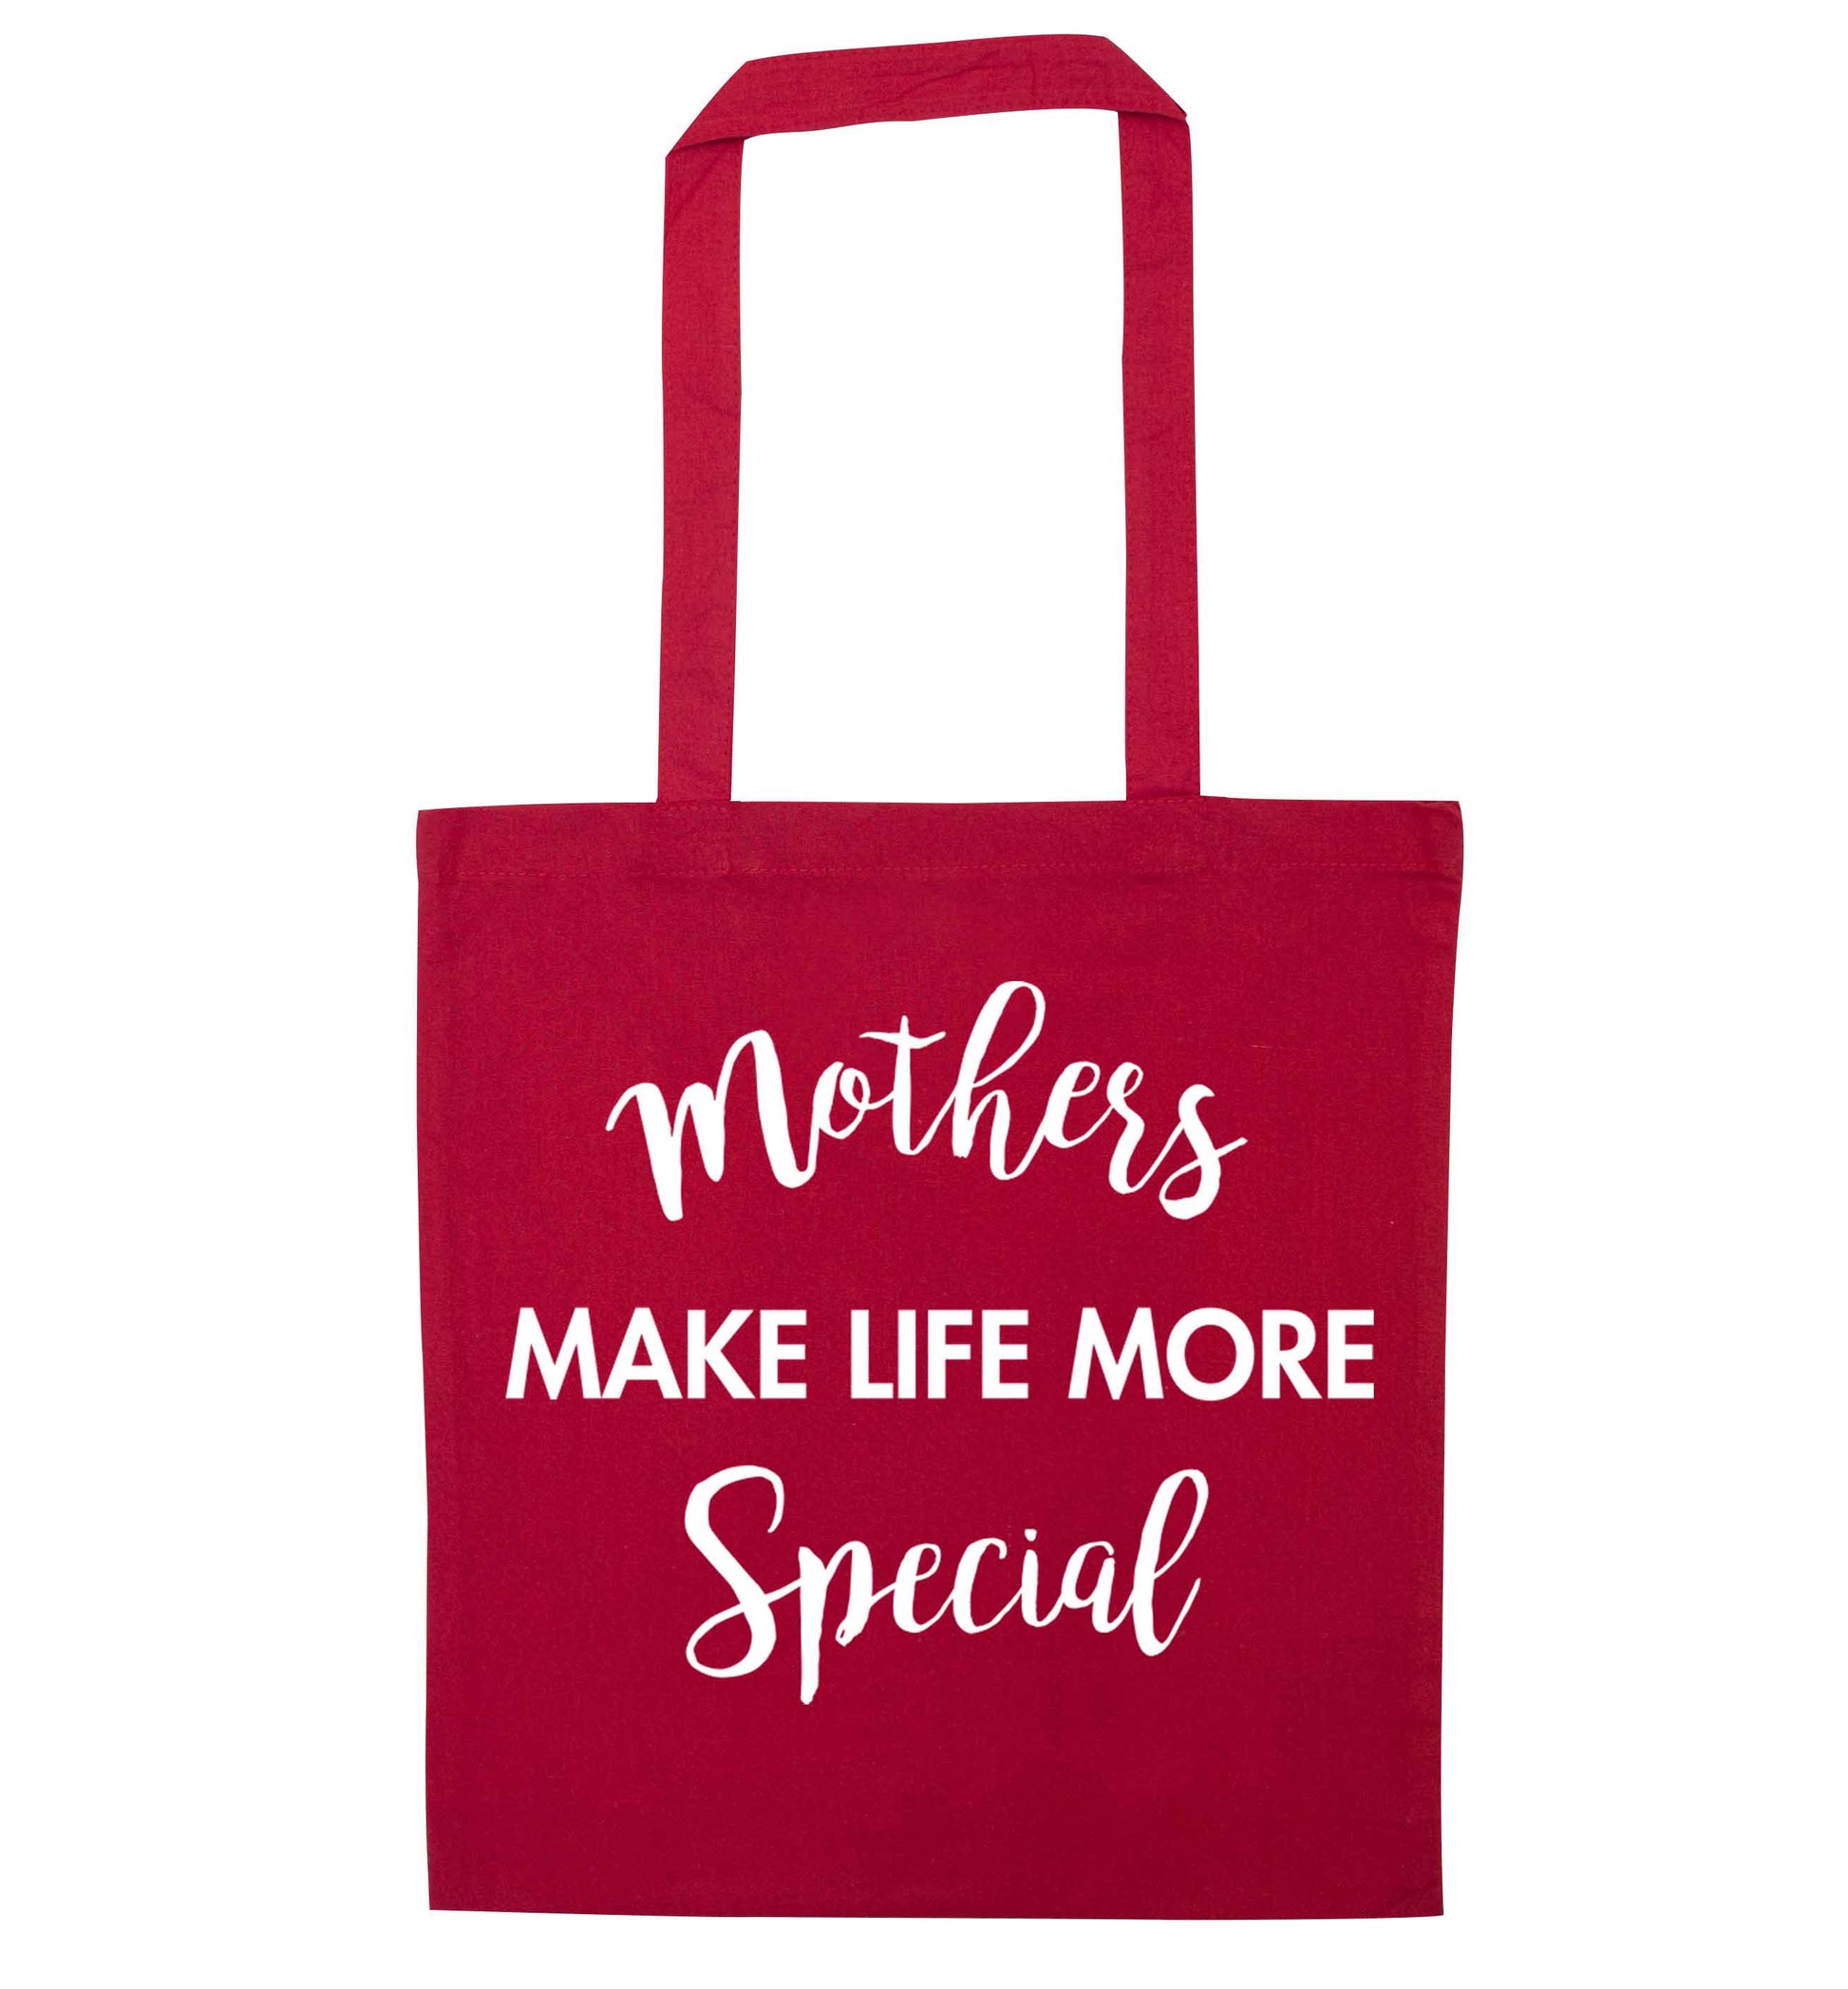 Mother's make life more special red tote bag